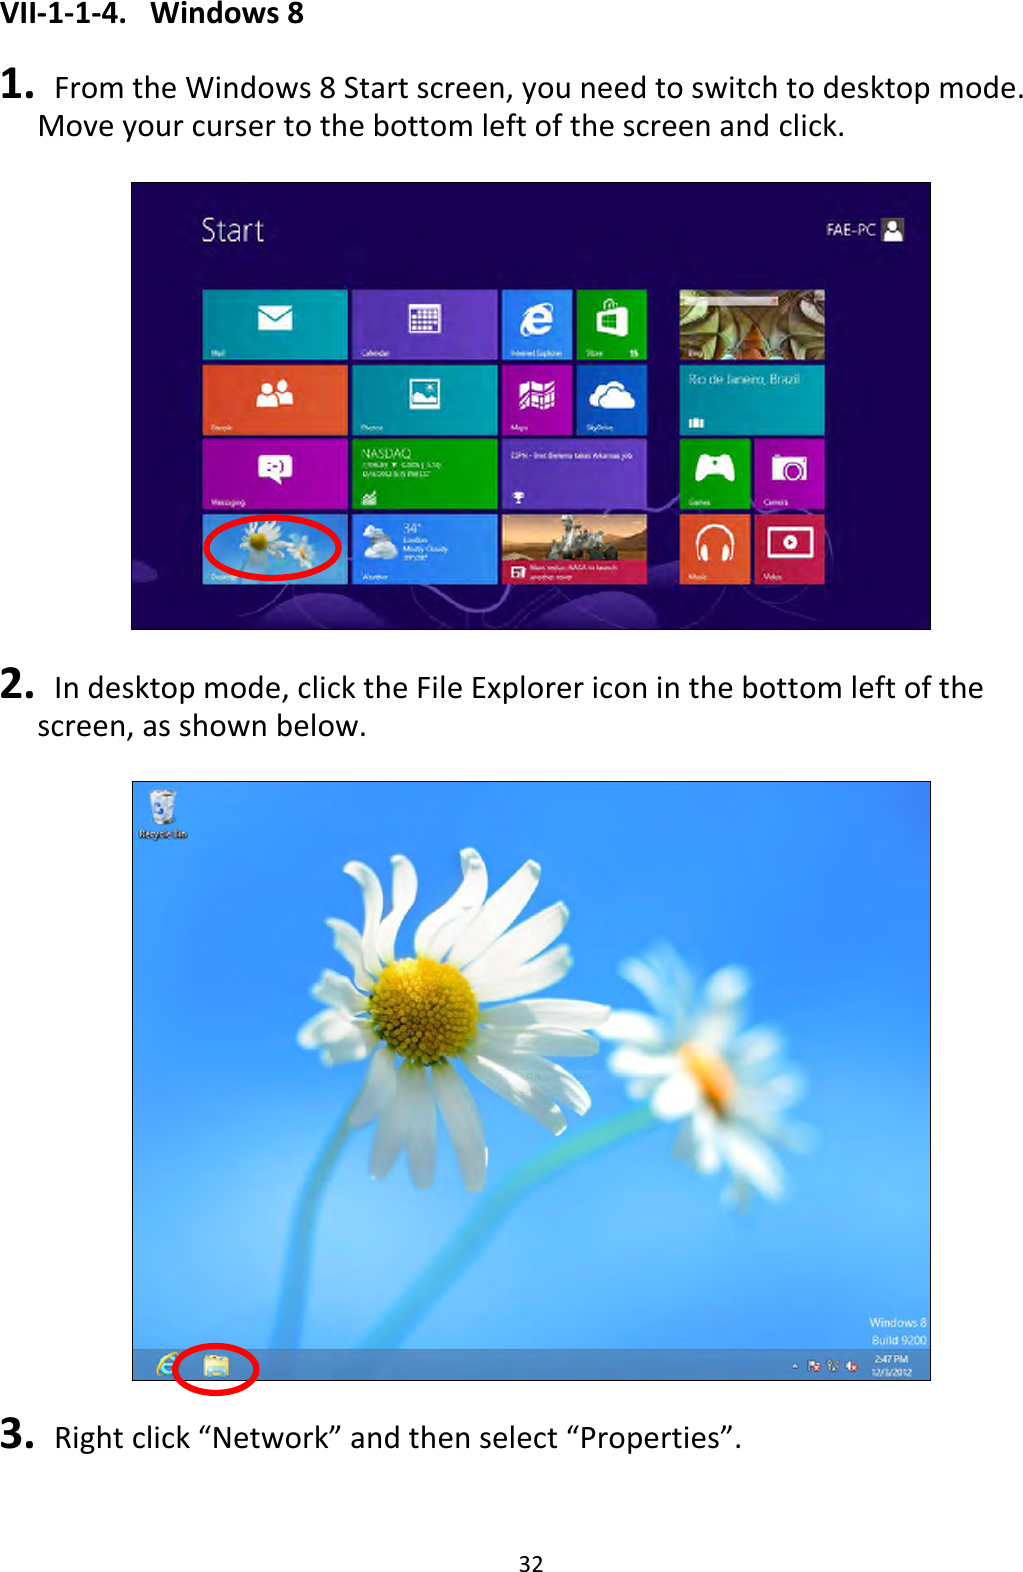 32 VII-1-1-4.  Windows 8  1.   From the Windows 8 Start screen, you need to switch to desktop mode. Move your curser to the bottom left of the screen and click.    2.   In desktop mode, click the File Explorer icon in the bottom left of the screen, as shown below.    3.  Right click “Network” and then select “Properties”.  